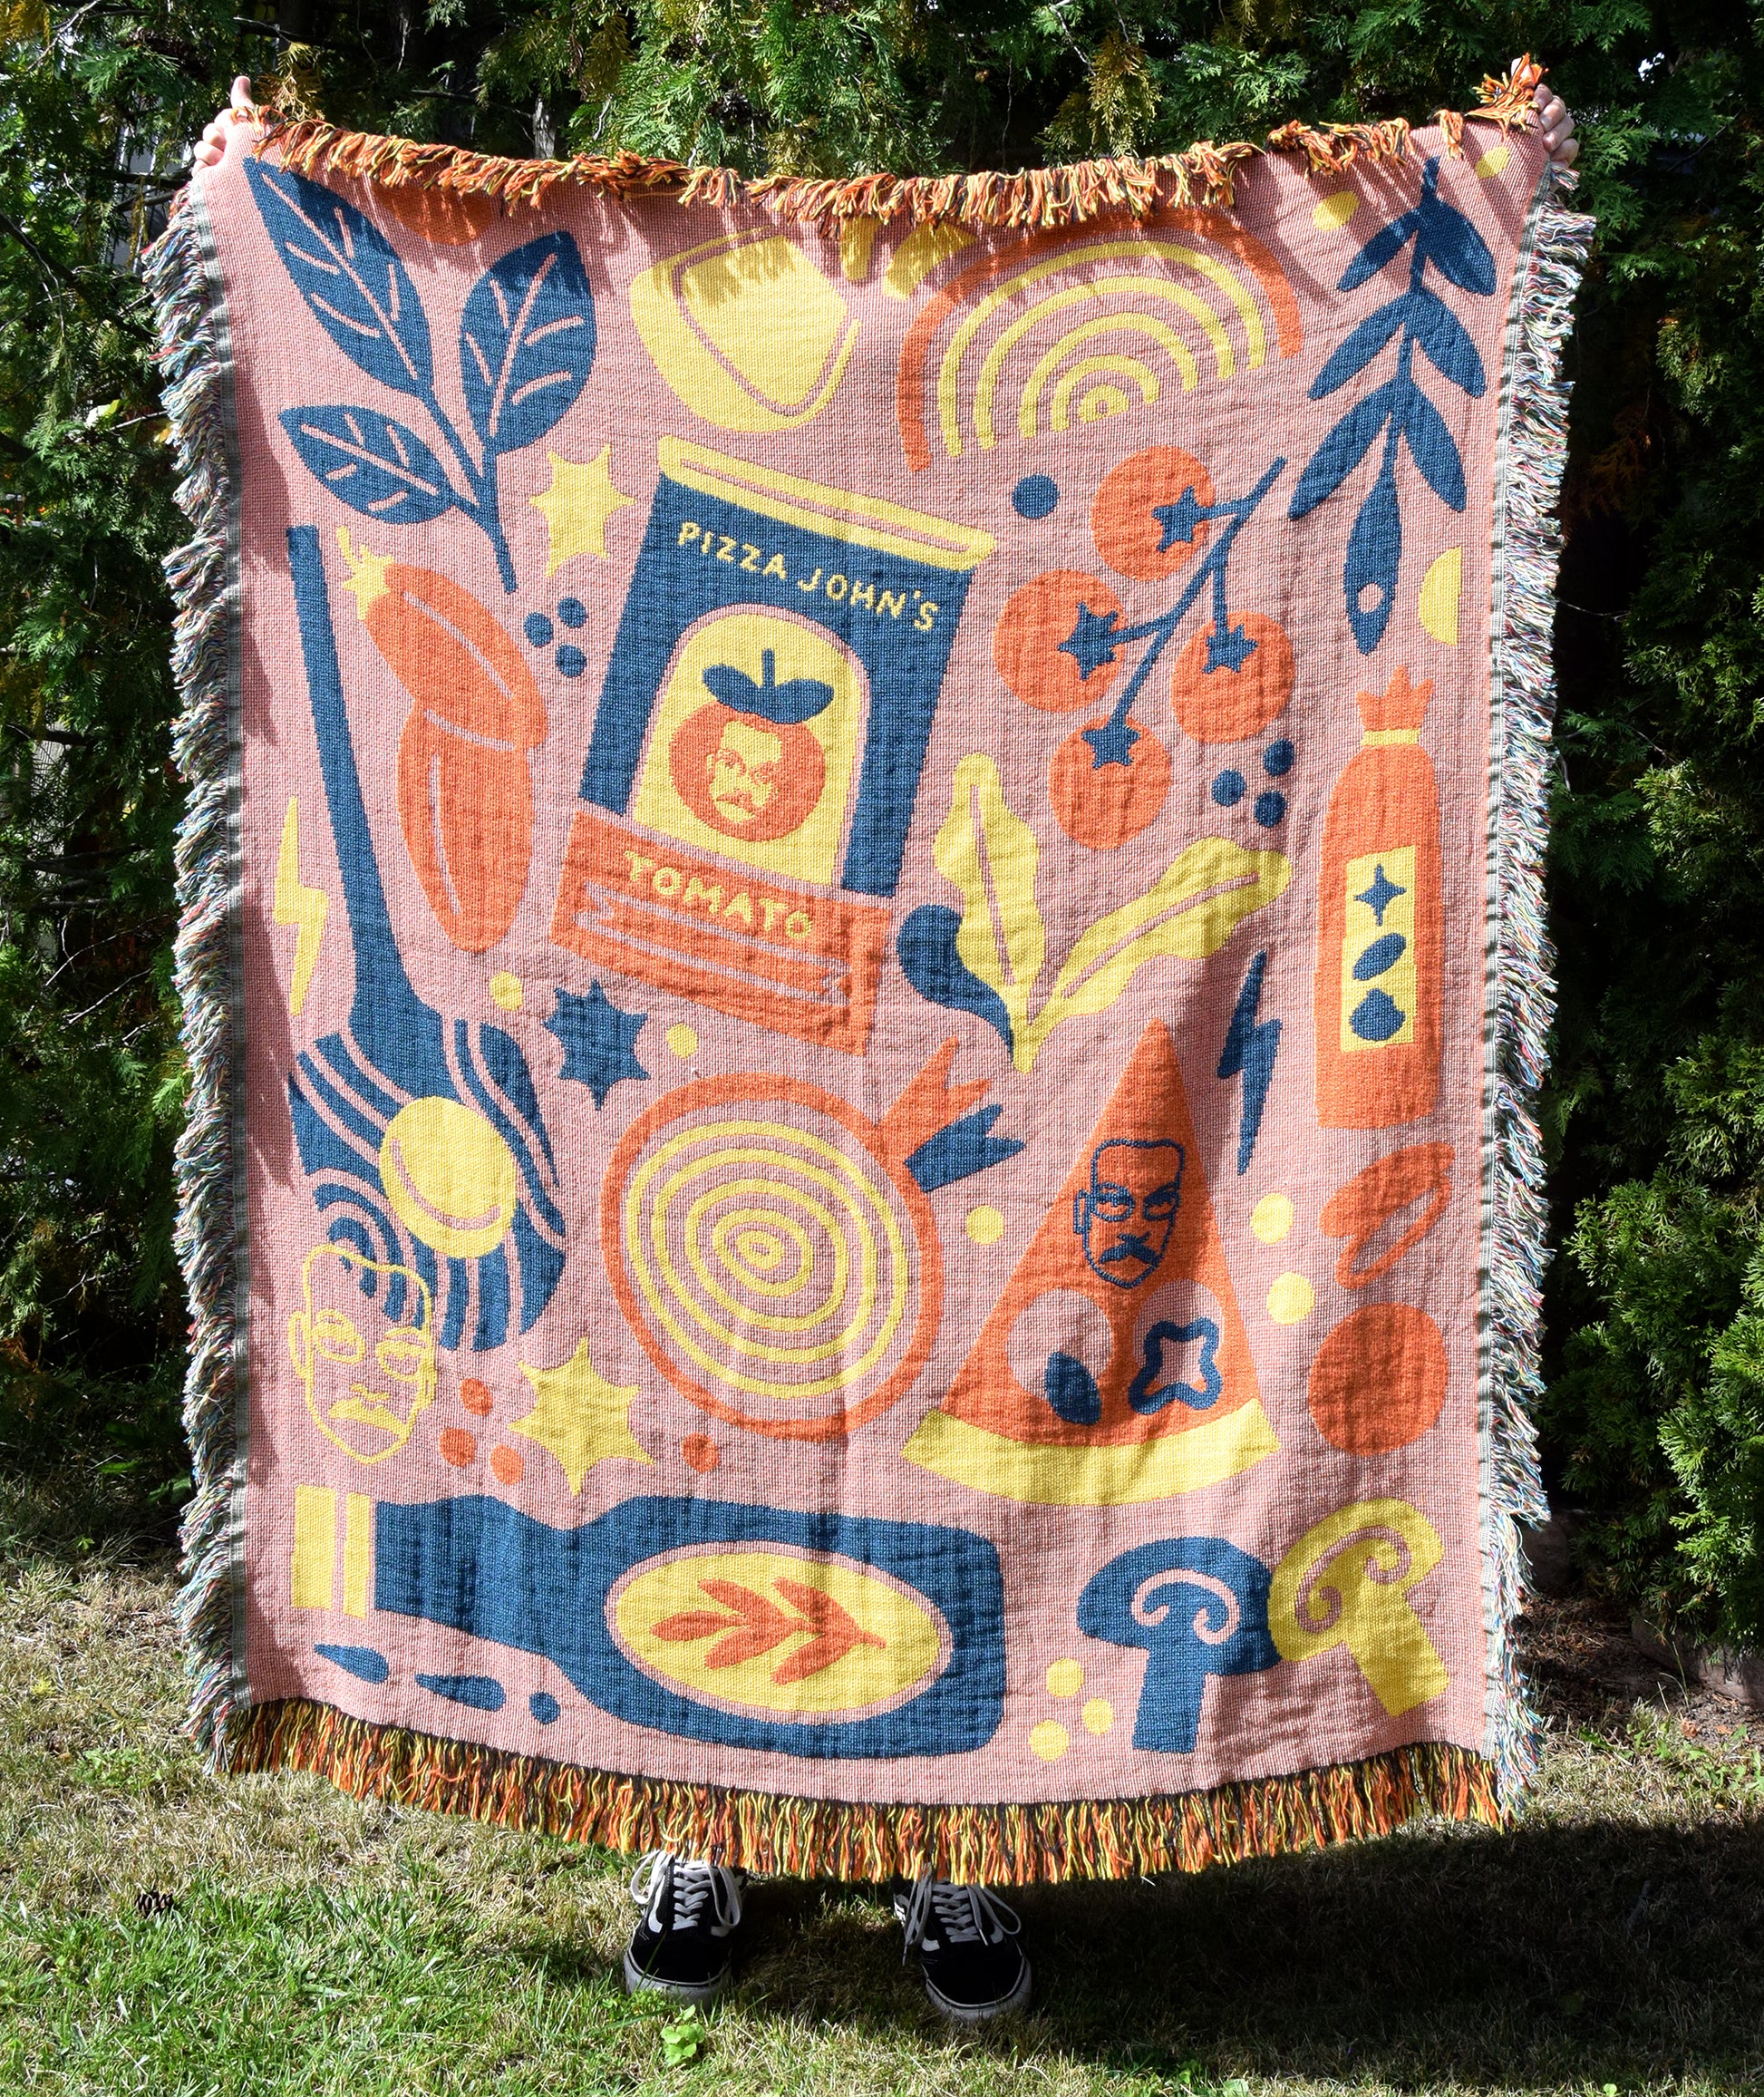 Celebrate the First Day of Fall With a Fleece Pizza Blanket - PMQ Pizza  Magazine